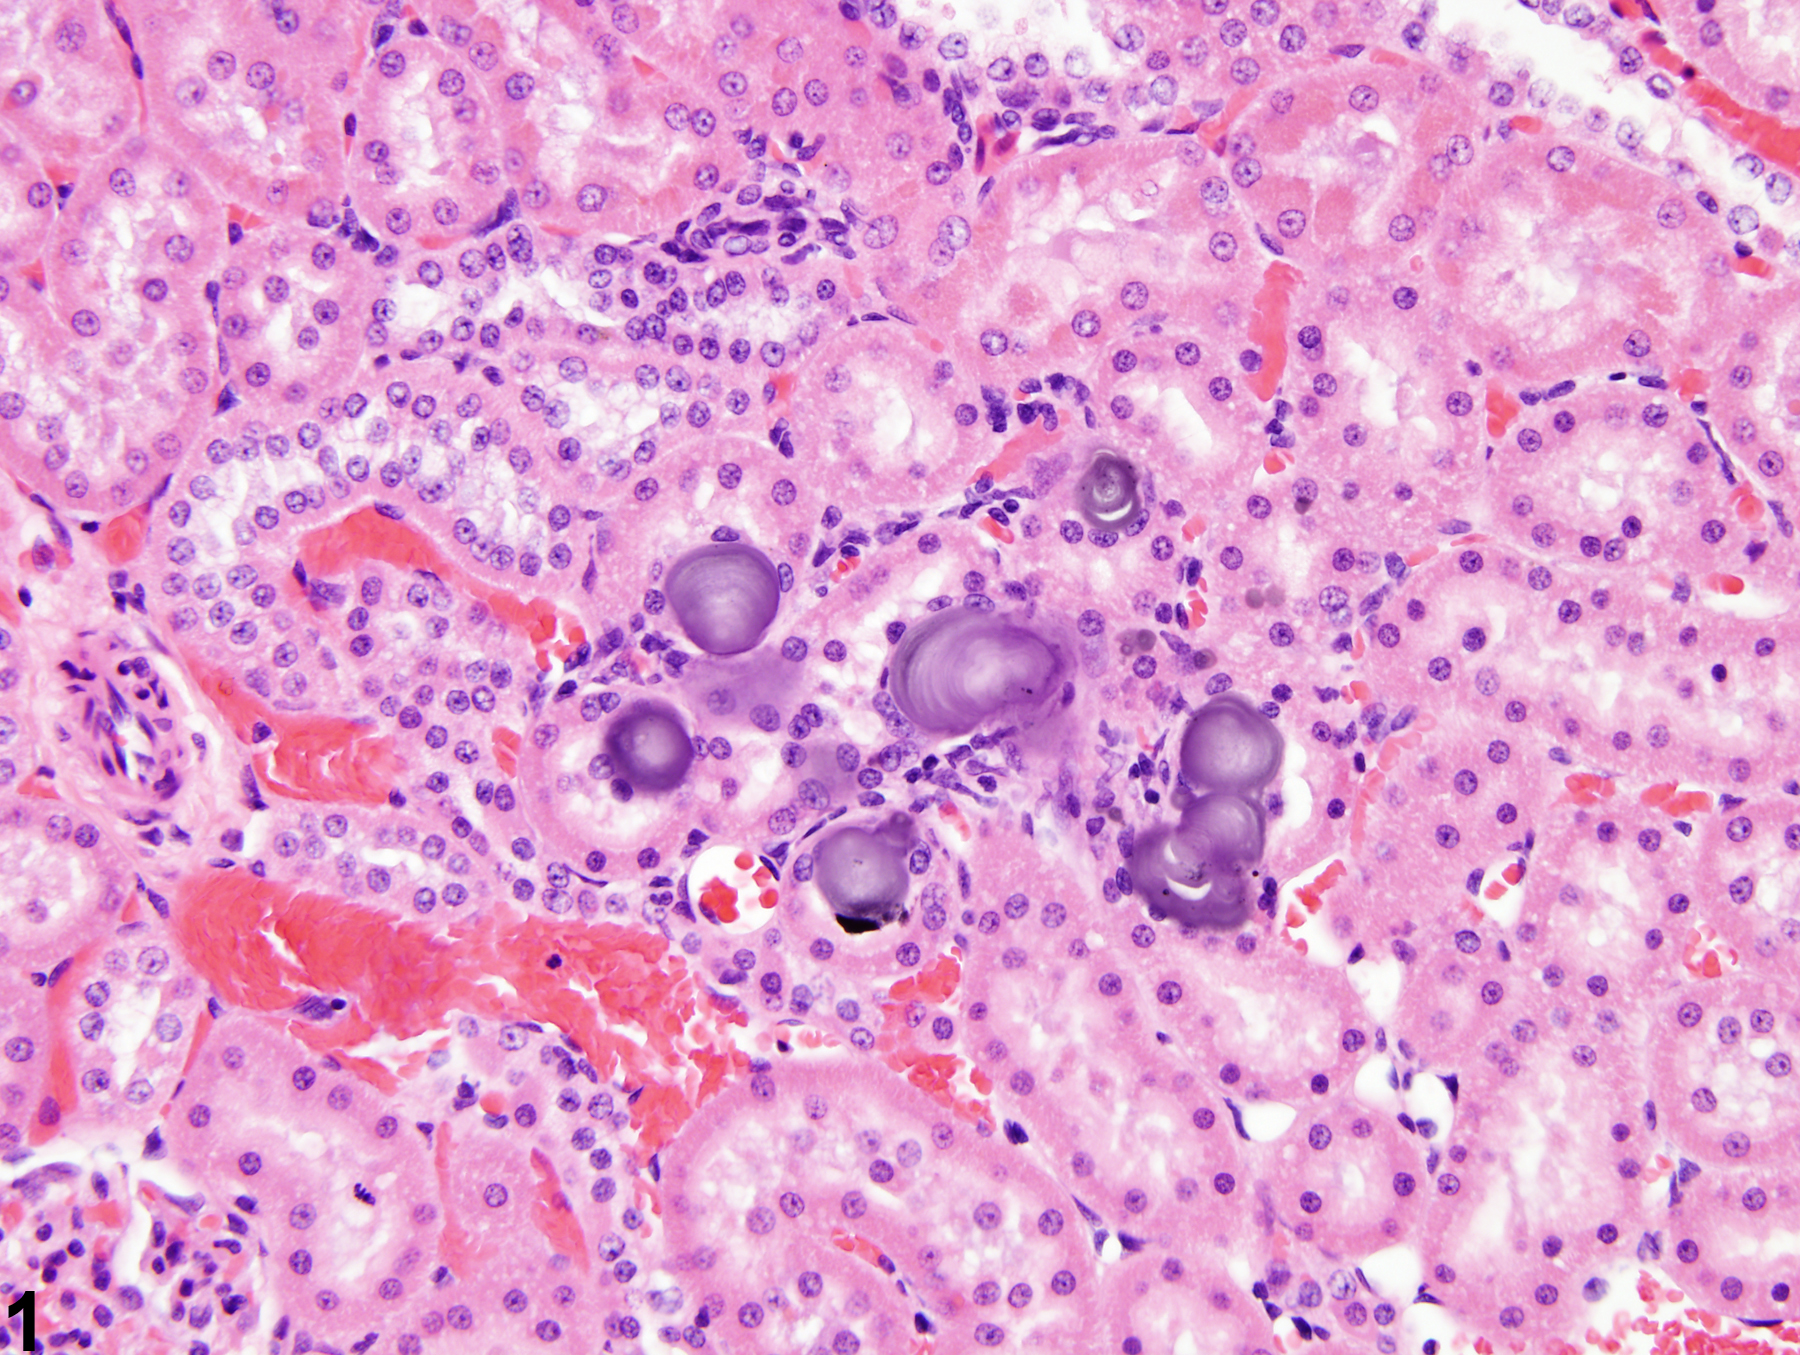 Image of mineralization in the kidney from a male F344/N rat in an acute study